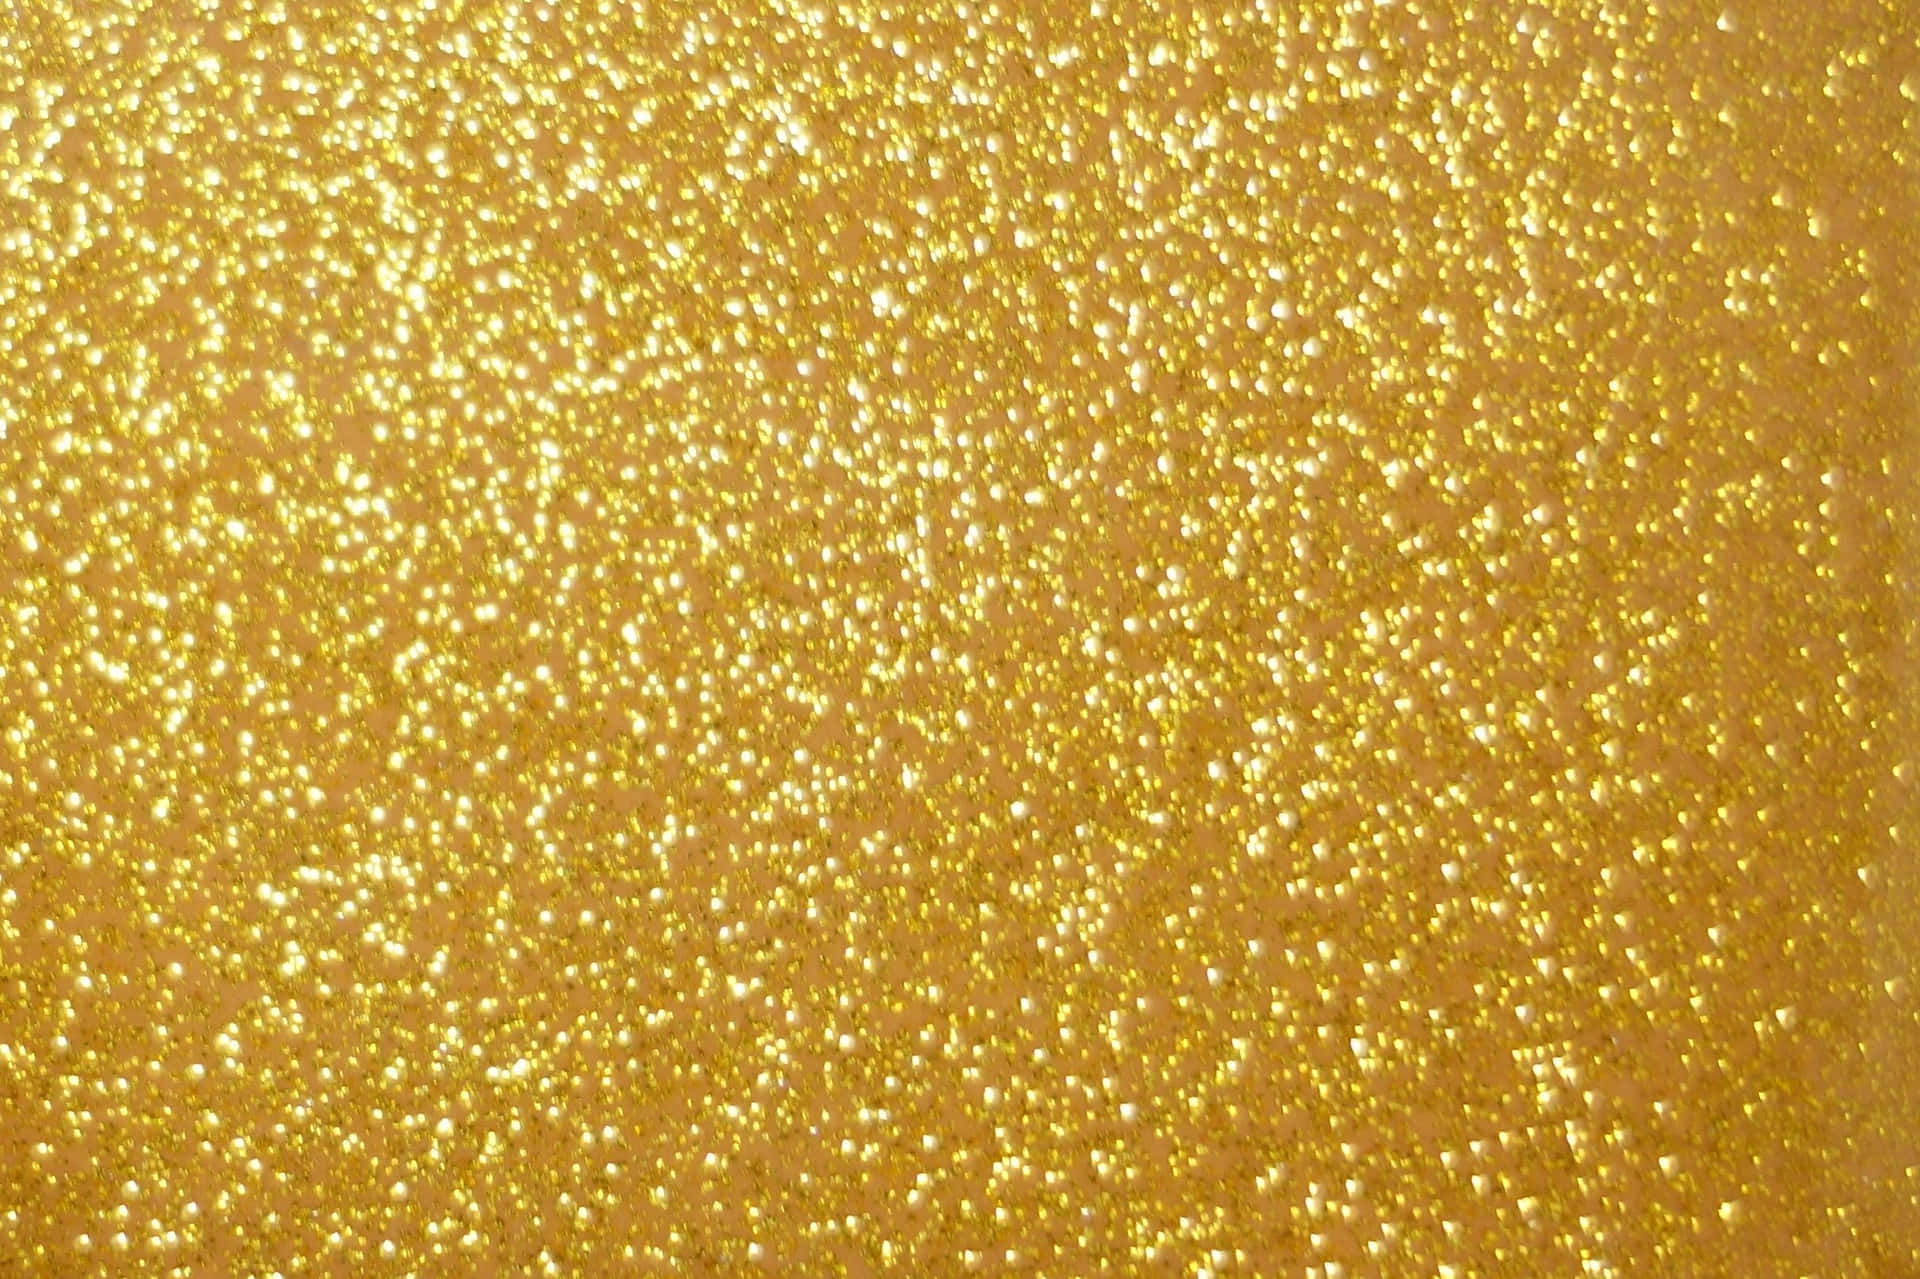 A Bright and Glittery Yellow Background